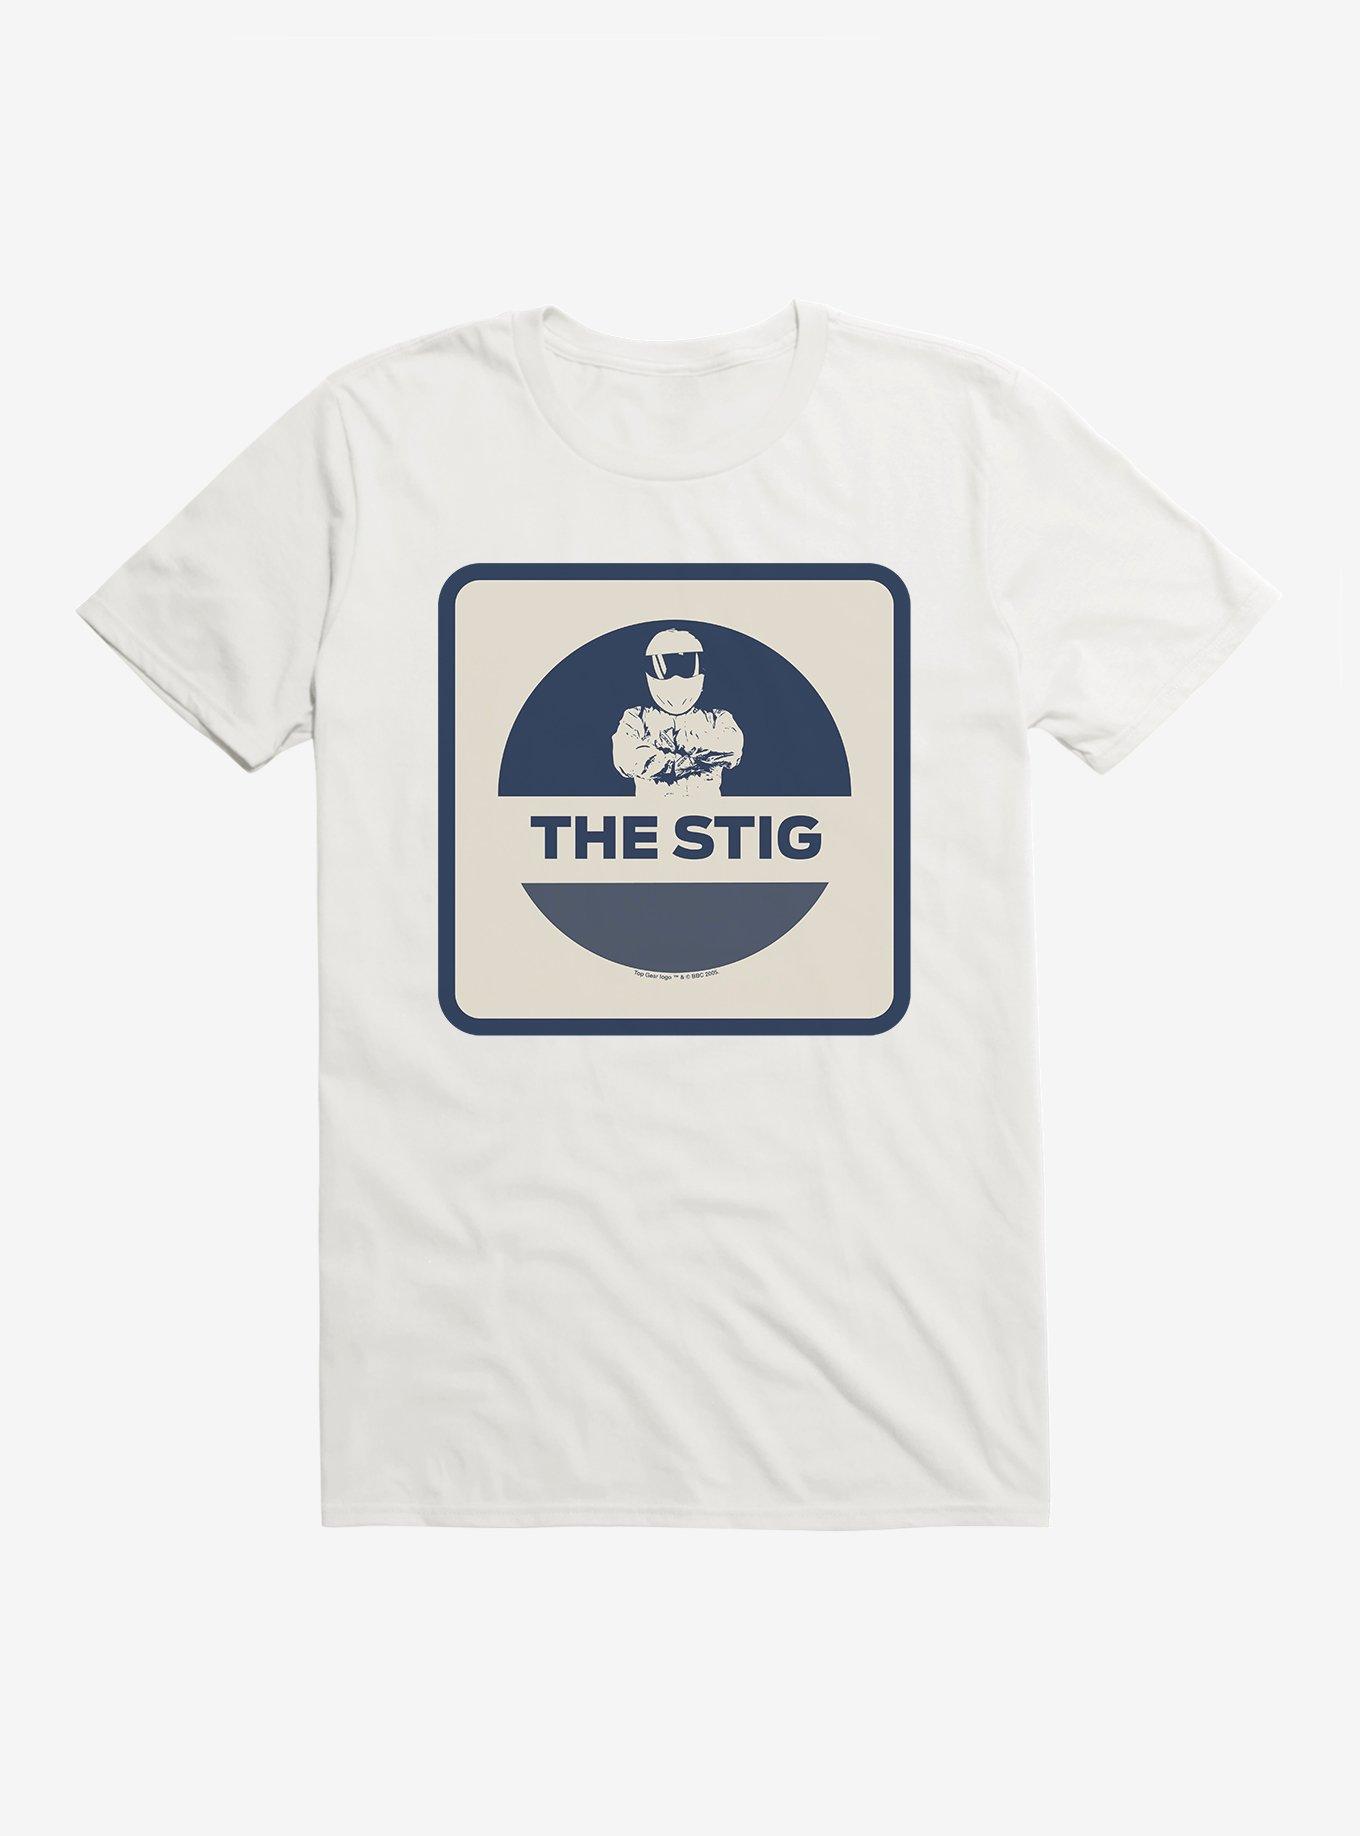 Top Gear The Stance T-Shirt | Hot Topic